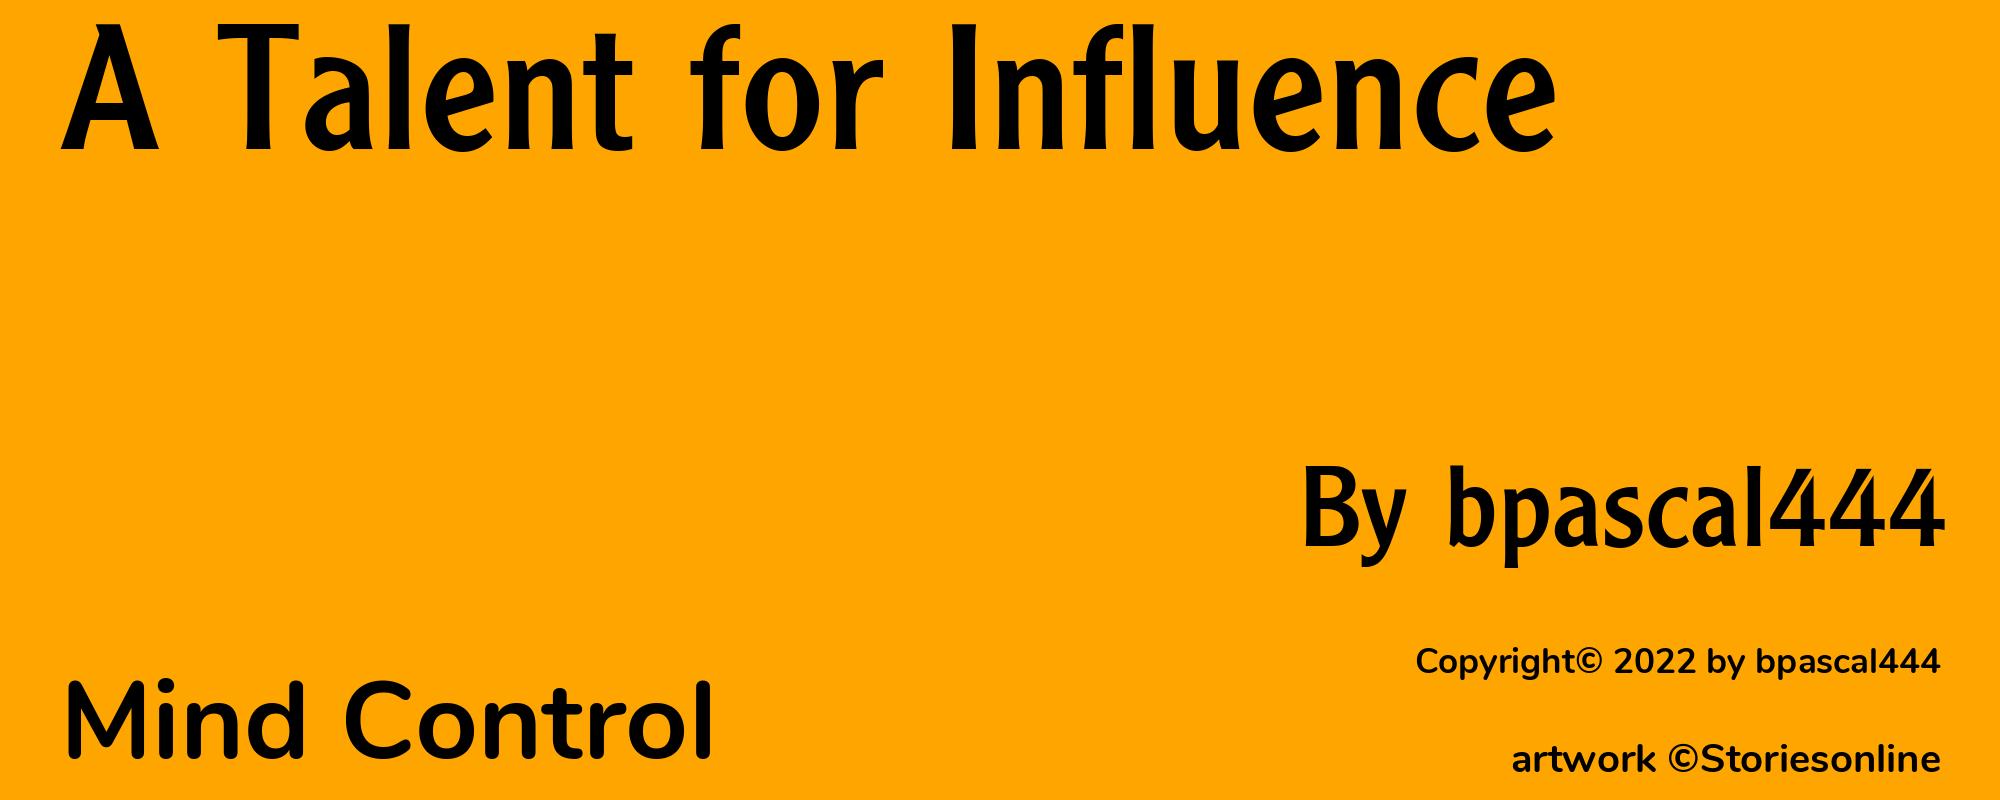 A Talent for Influence - Cover